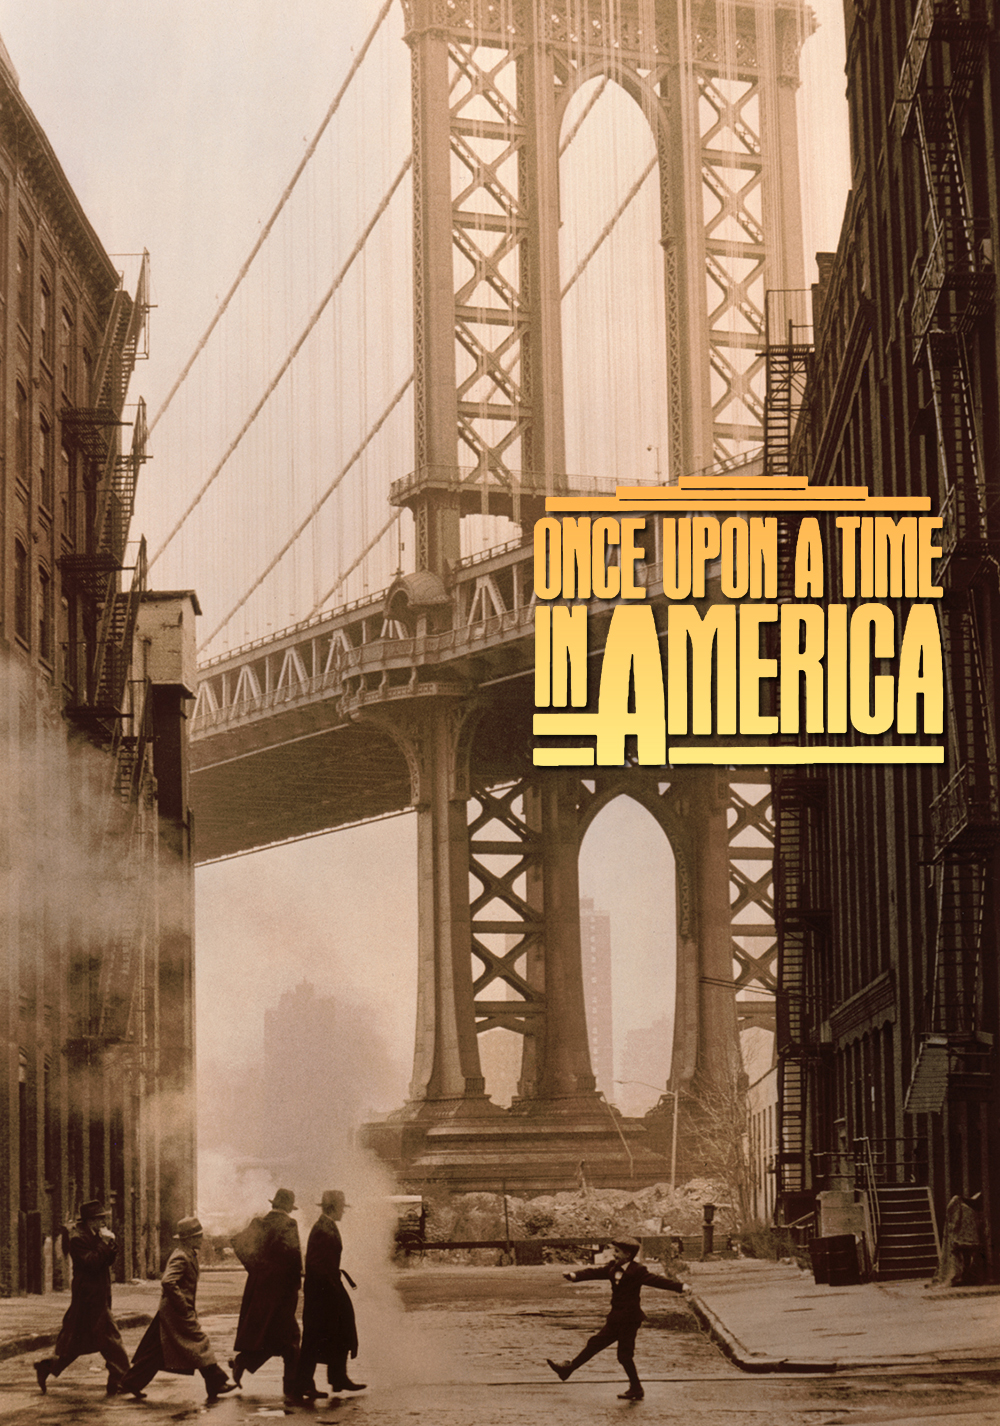 1000x1426px Once Upon A Time In America 116013 KB 299500